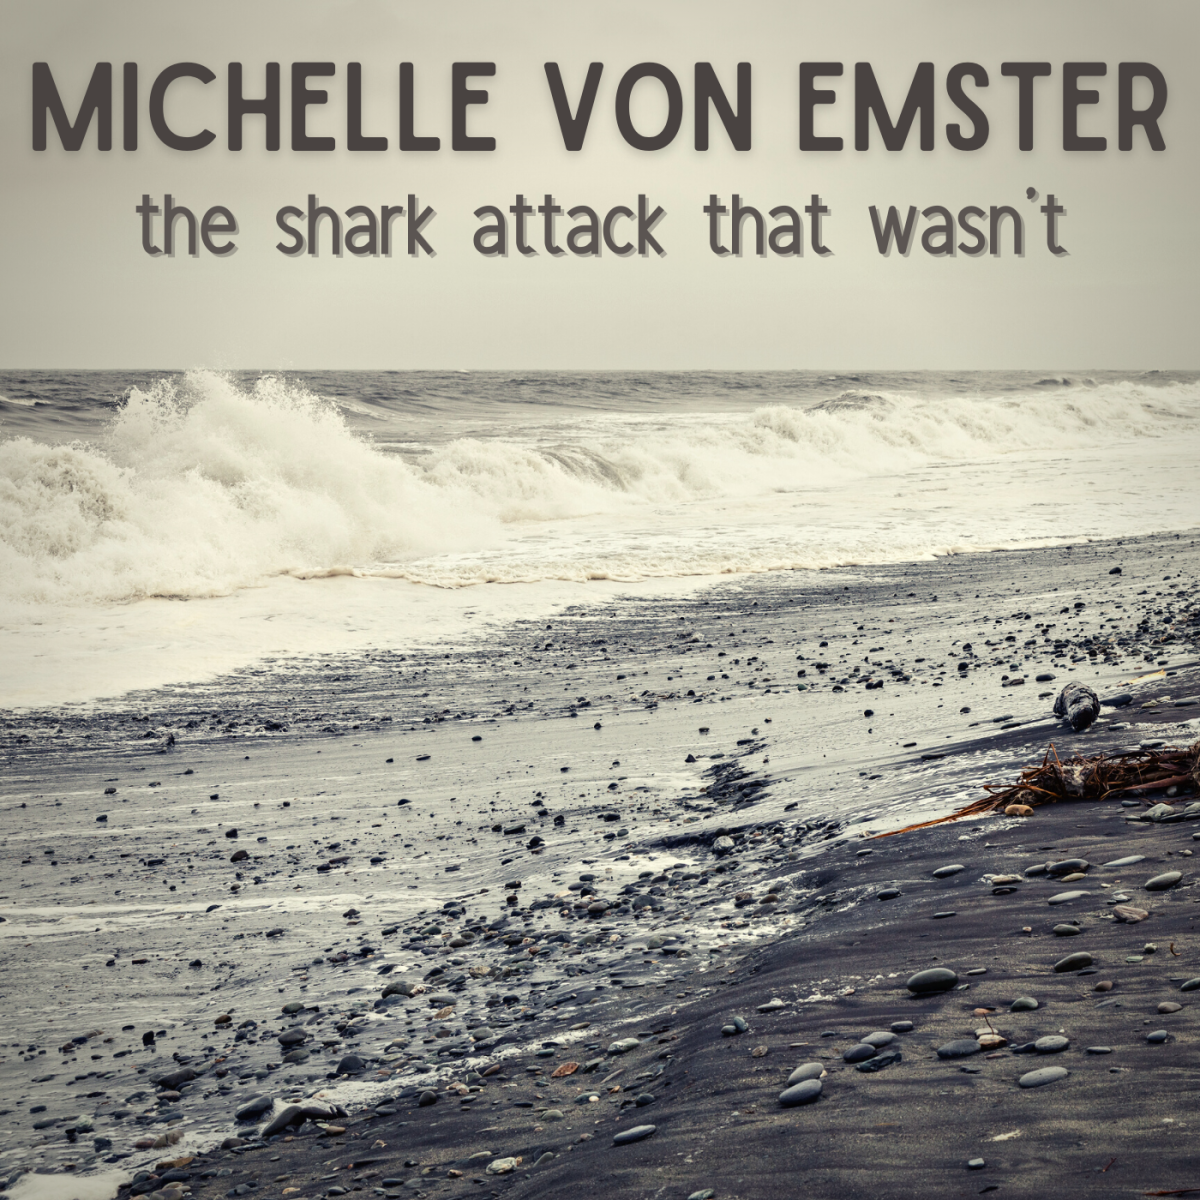 Michelle Von Emster: What Really Happened?